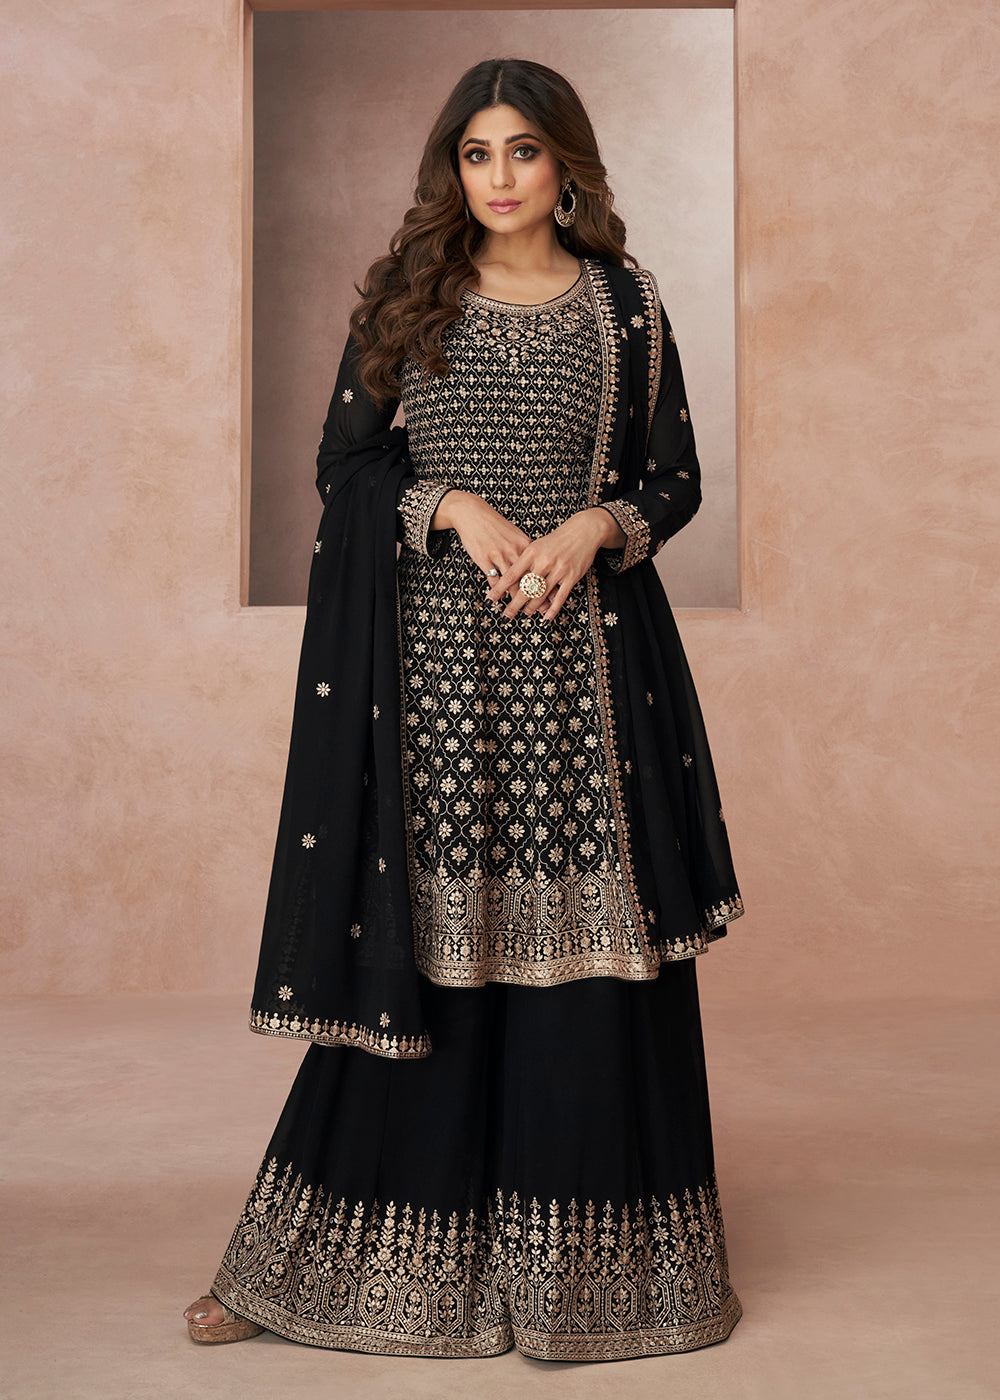 Buy Now Tempting Festive Look Black Georgette Palazzo Style Suit Online in USA, UK, Canada, Germany, Australia & Worldwide at Empress Clothing. 